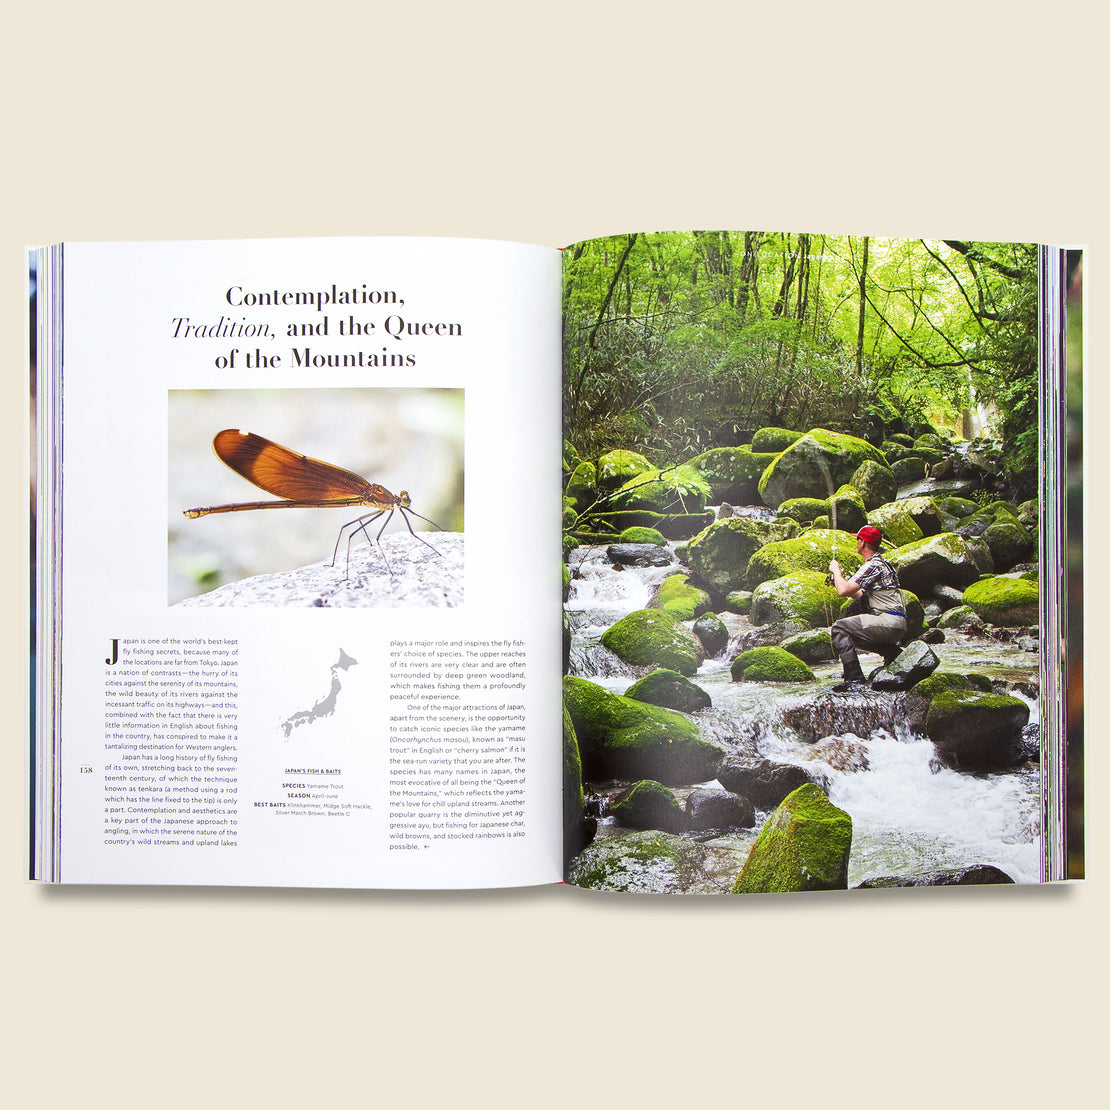 The Fly Fisher: The Essence and Essentials of Fly Fishing